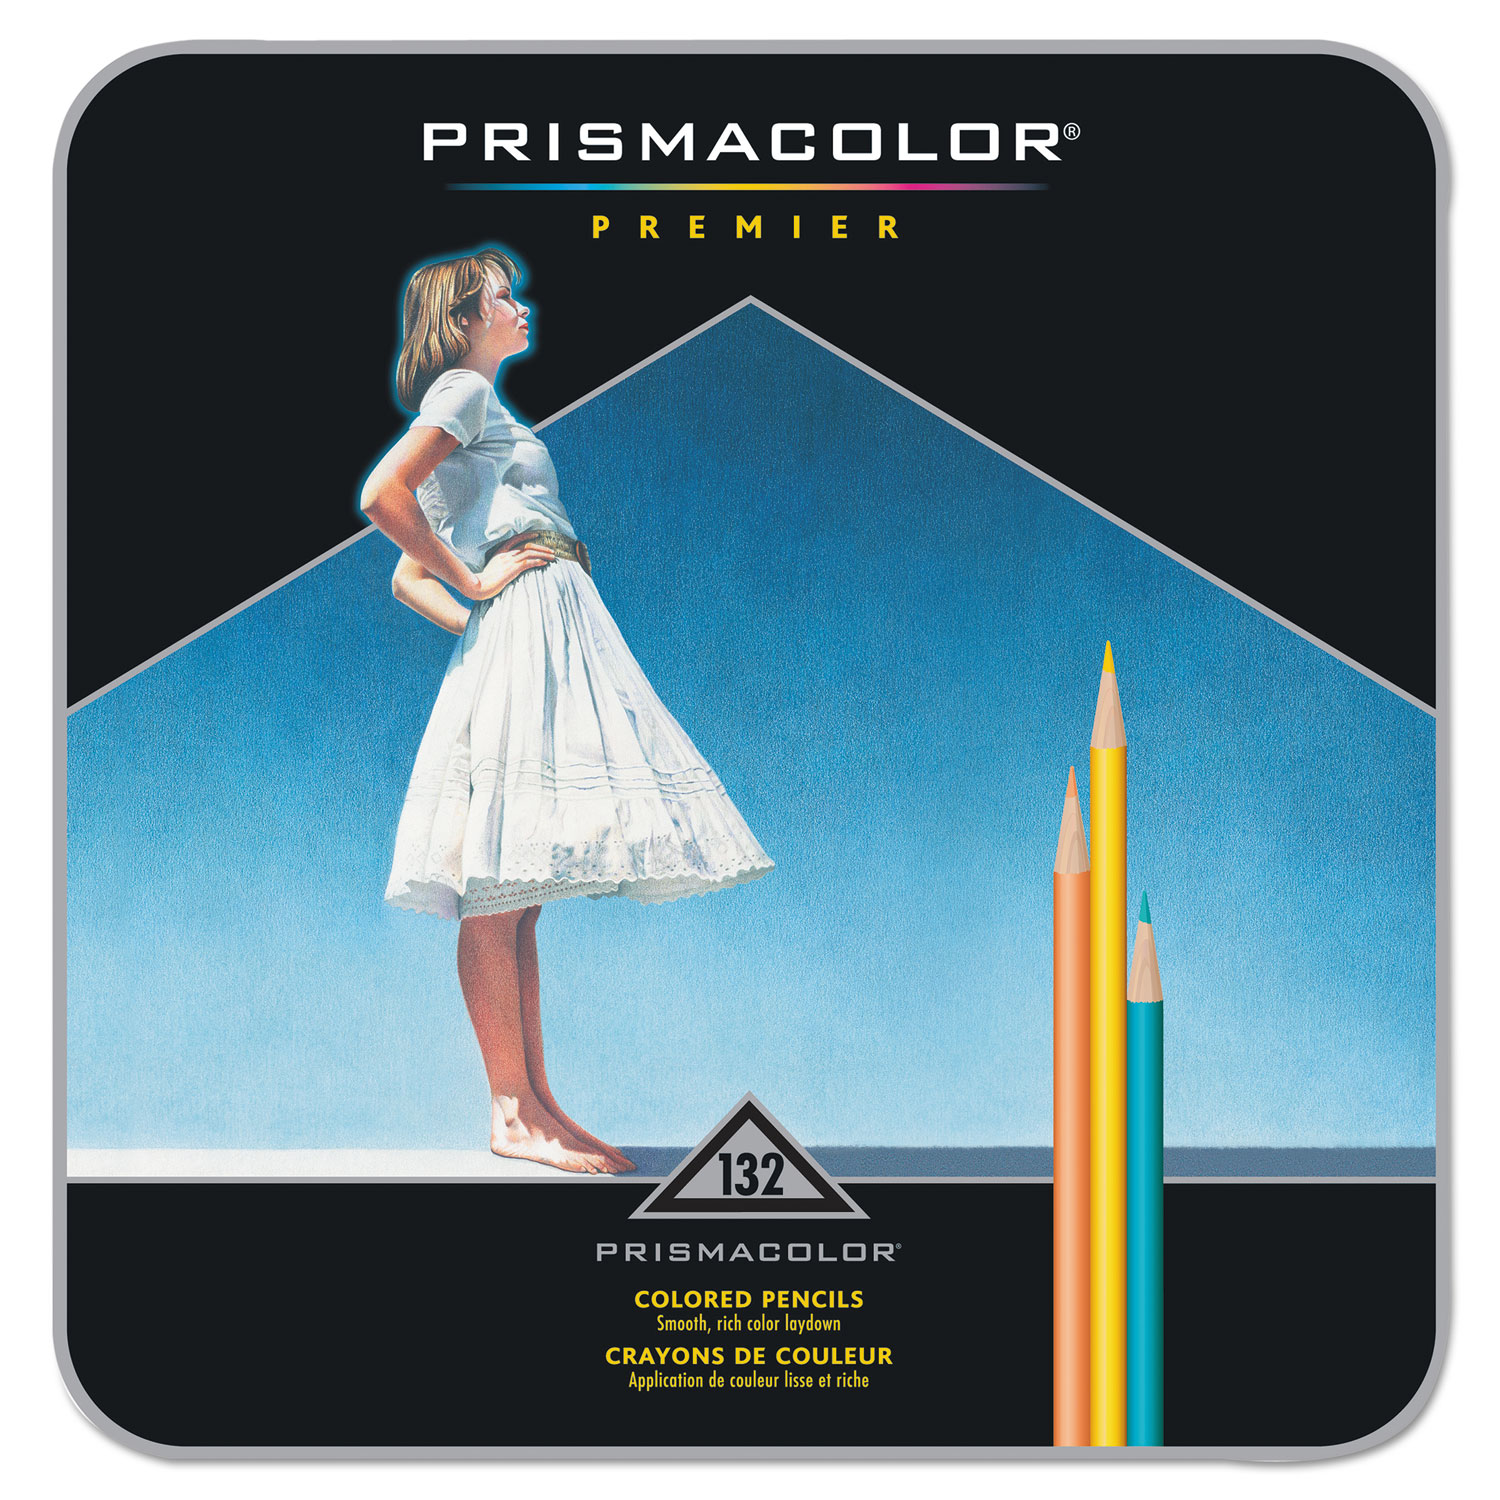 Groove Colored Pencils, 3.3 mm, 2B, Assorted Lead and Barrel Colors, 24/Pack